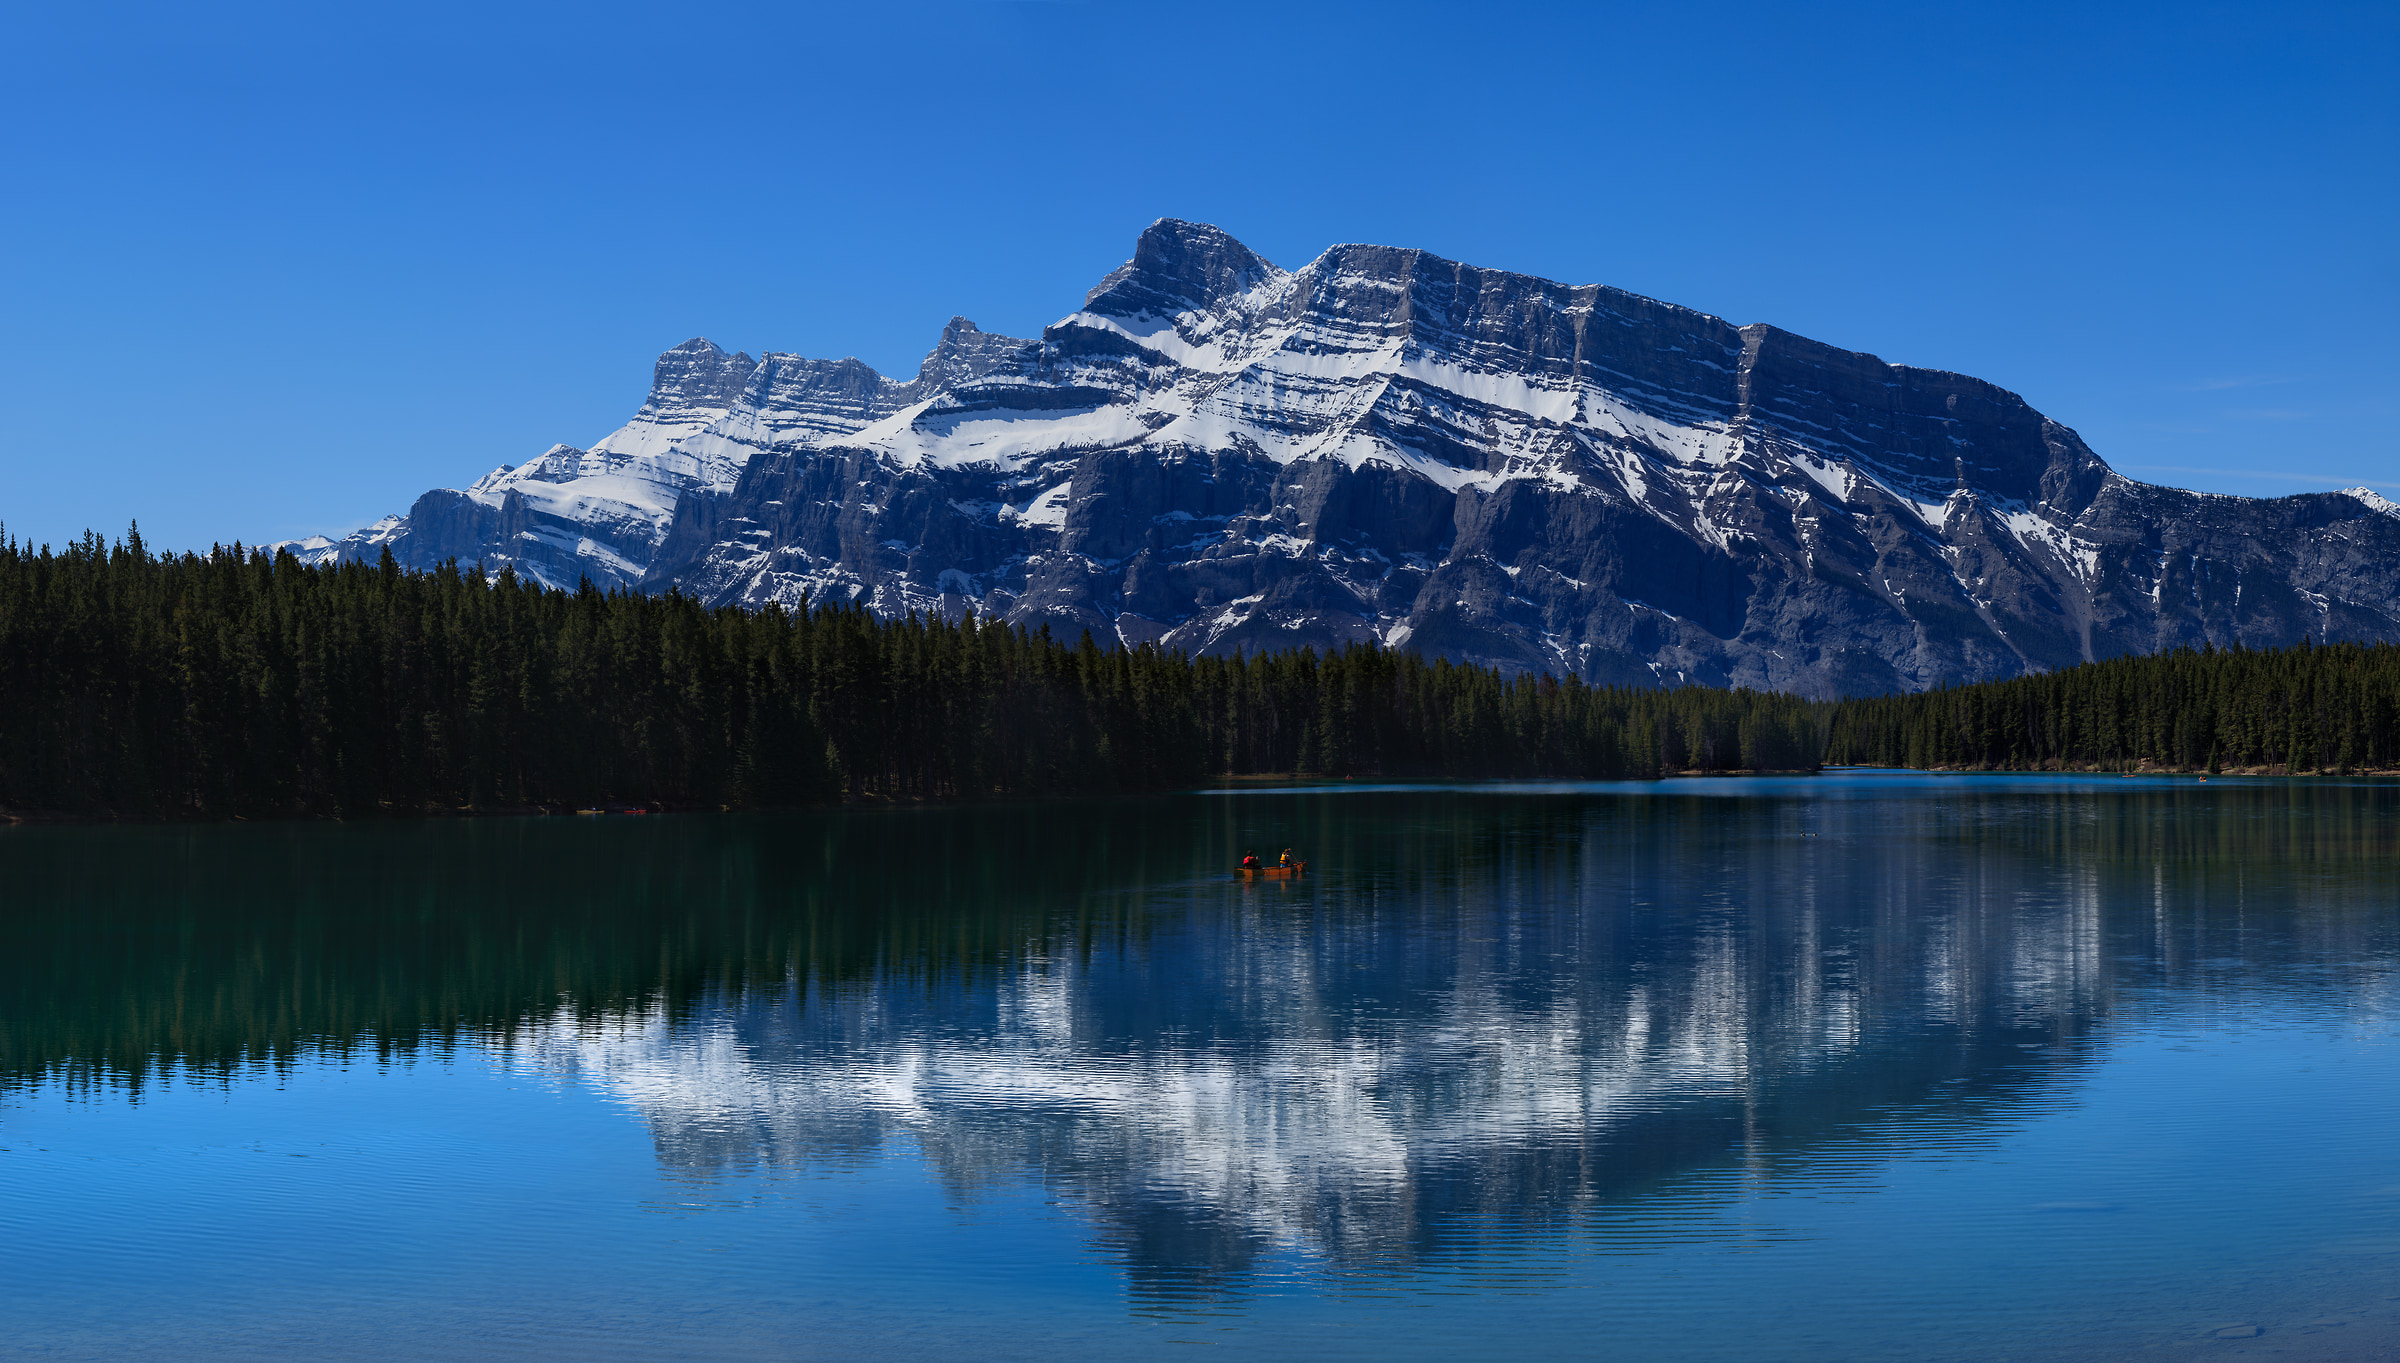 617 megapixels! A very high resolution, large-format VAST photo print of people kayaking on Two Jack Lake near Mount Rundle; fine art landscape photo created by Scott Dimond in Banff National Park, Alberta Canada